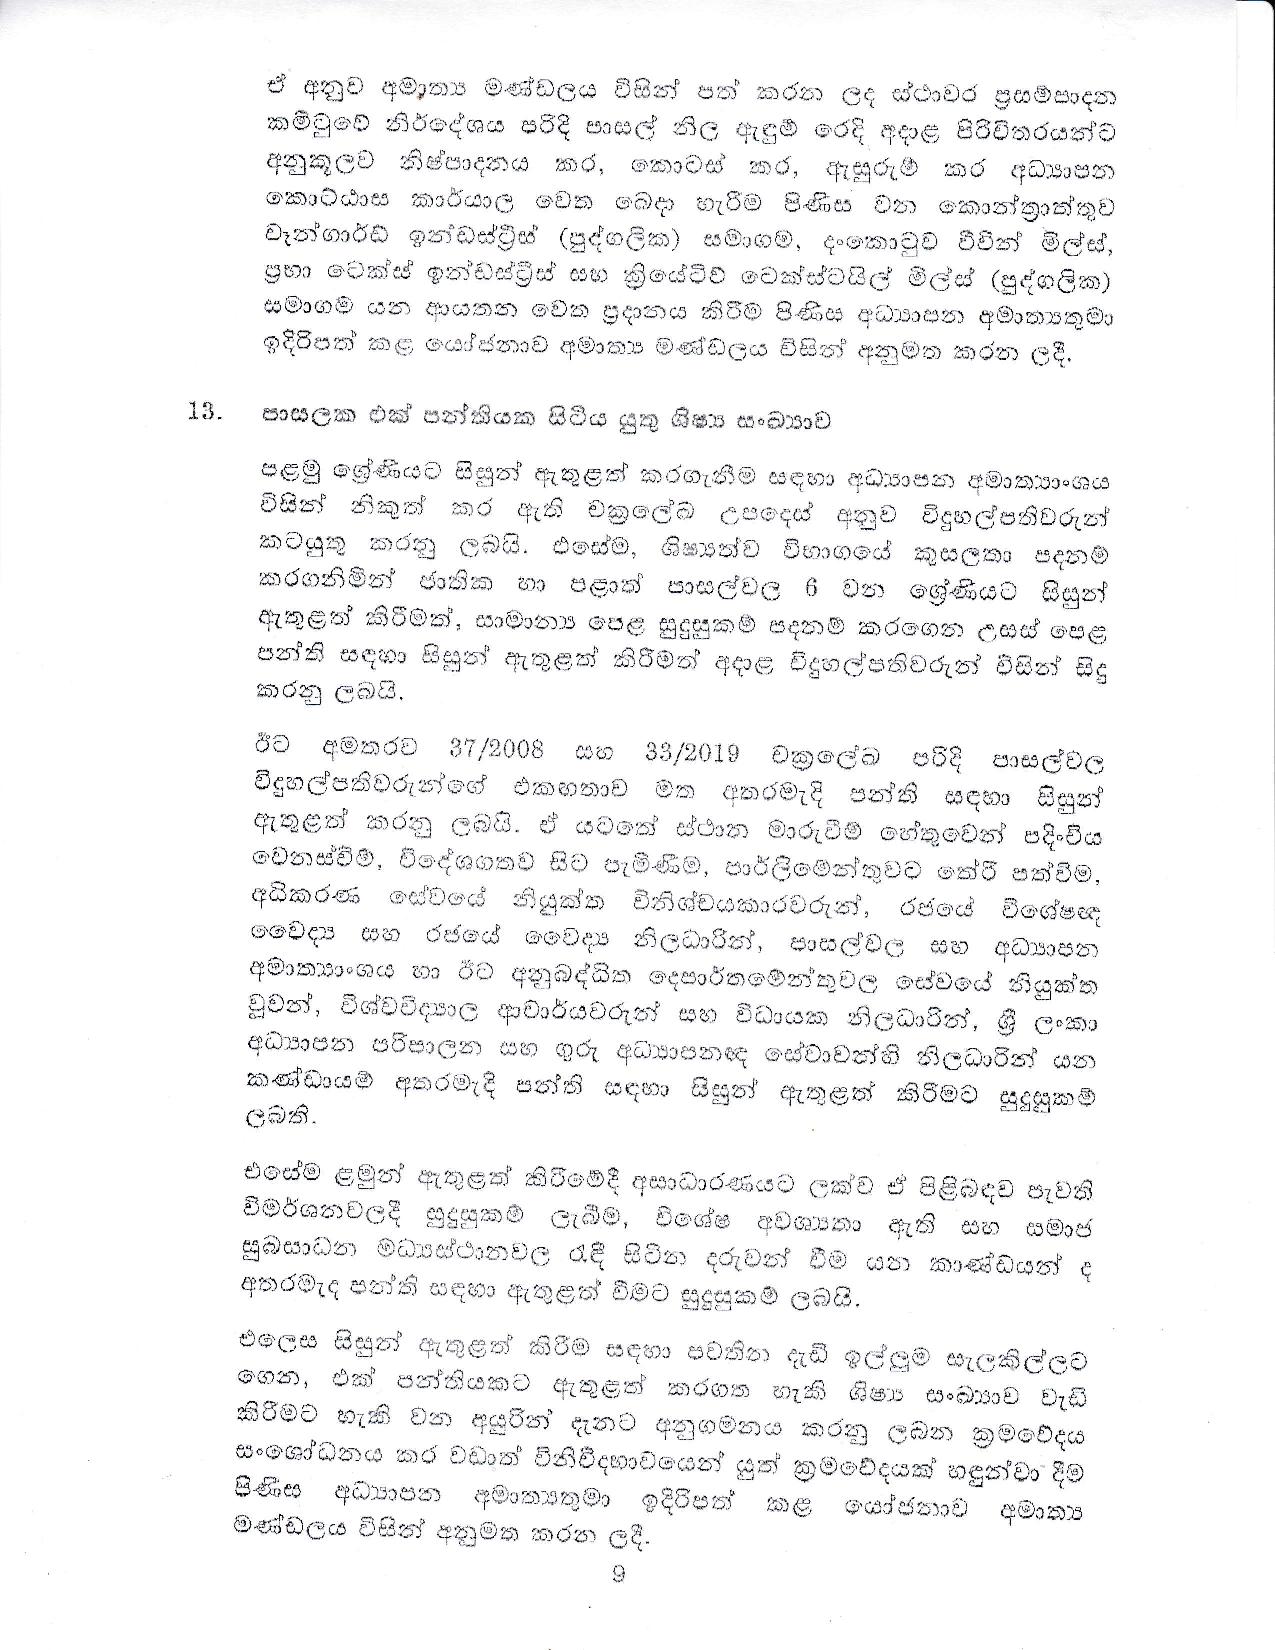 Cabinet Decision on 05.10.2020 page 009